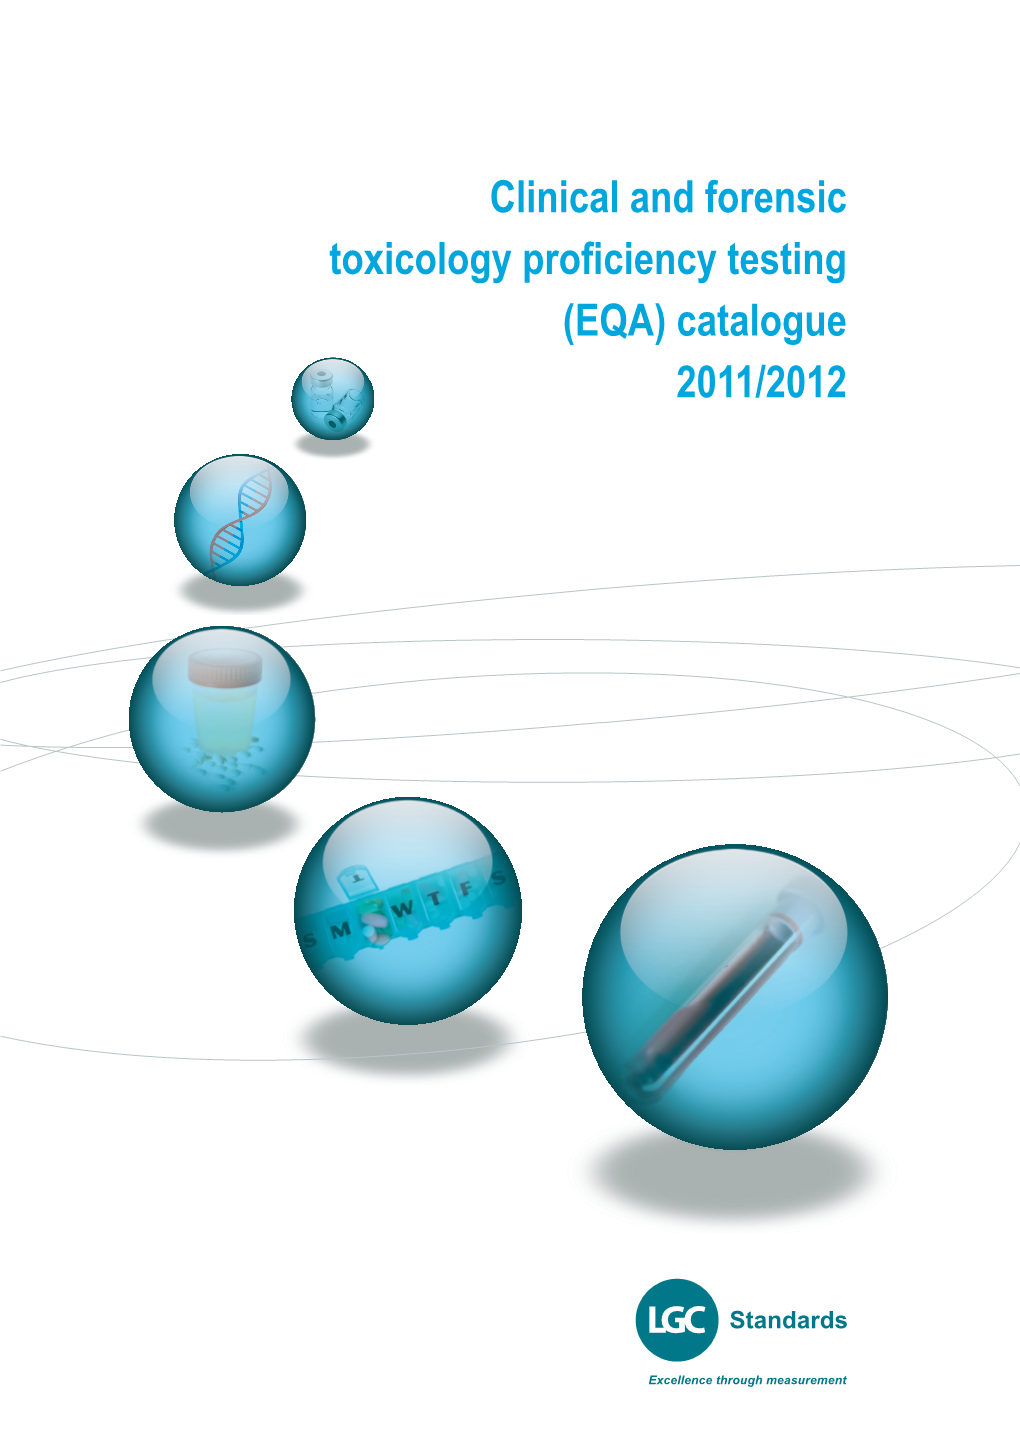 Clinical and Forensic Toxicology Proficiency Testing (EQA) Catalogue 2011/2012 Contents